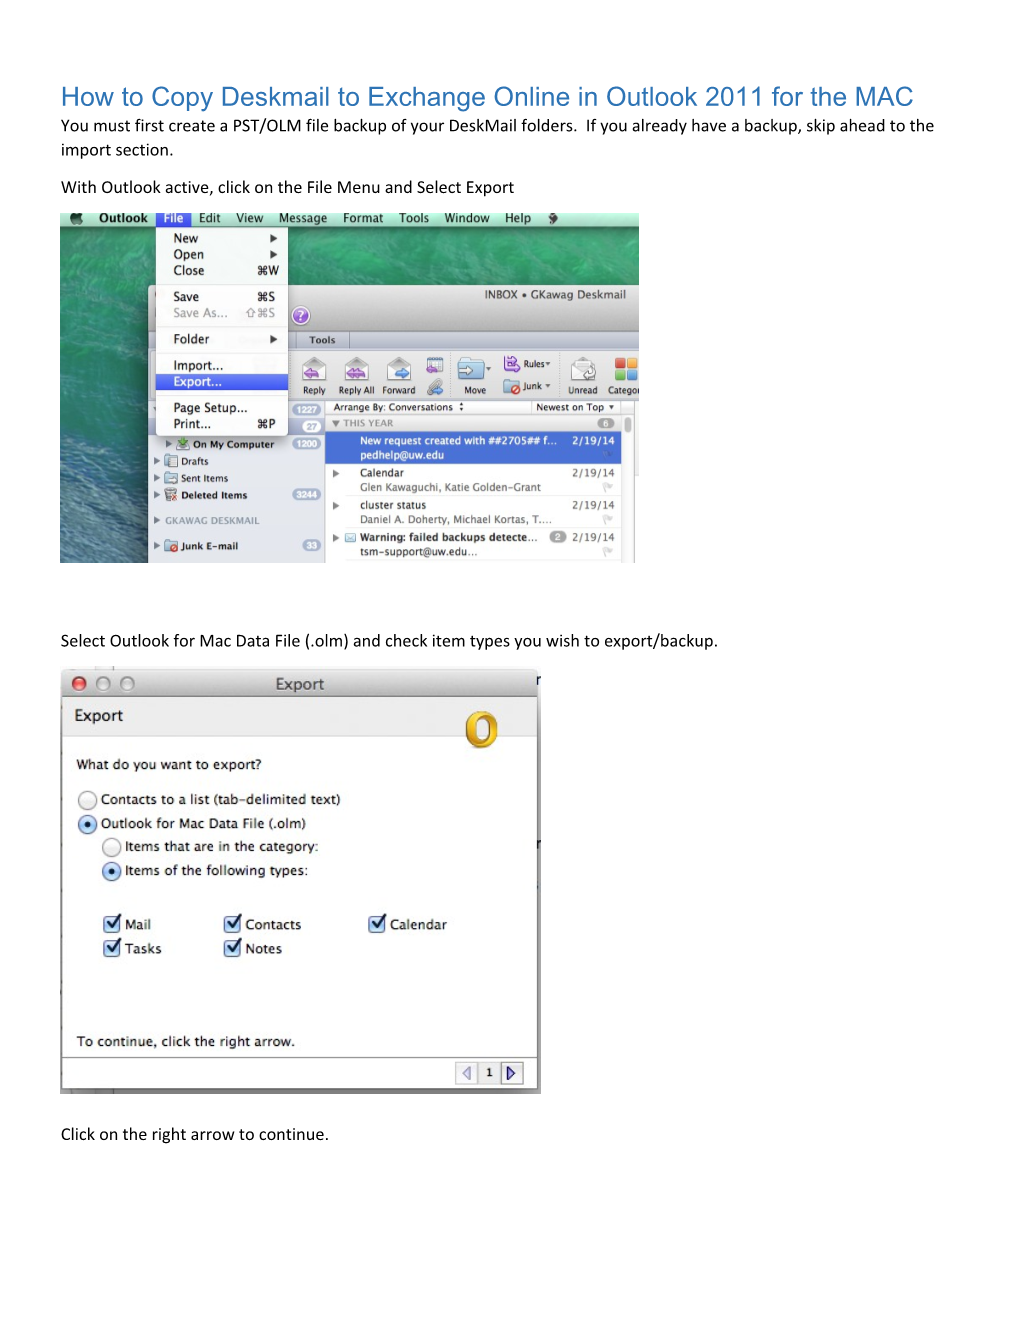 How to Copy Deskmail to Exchange Online in Outlook 2011 for the MAC